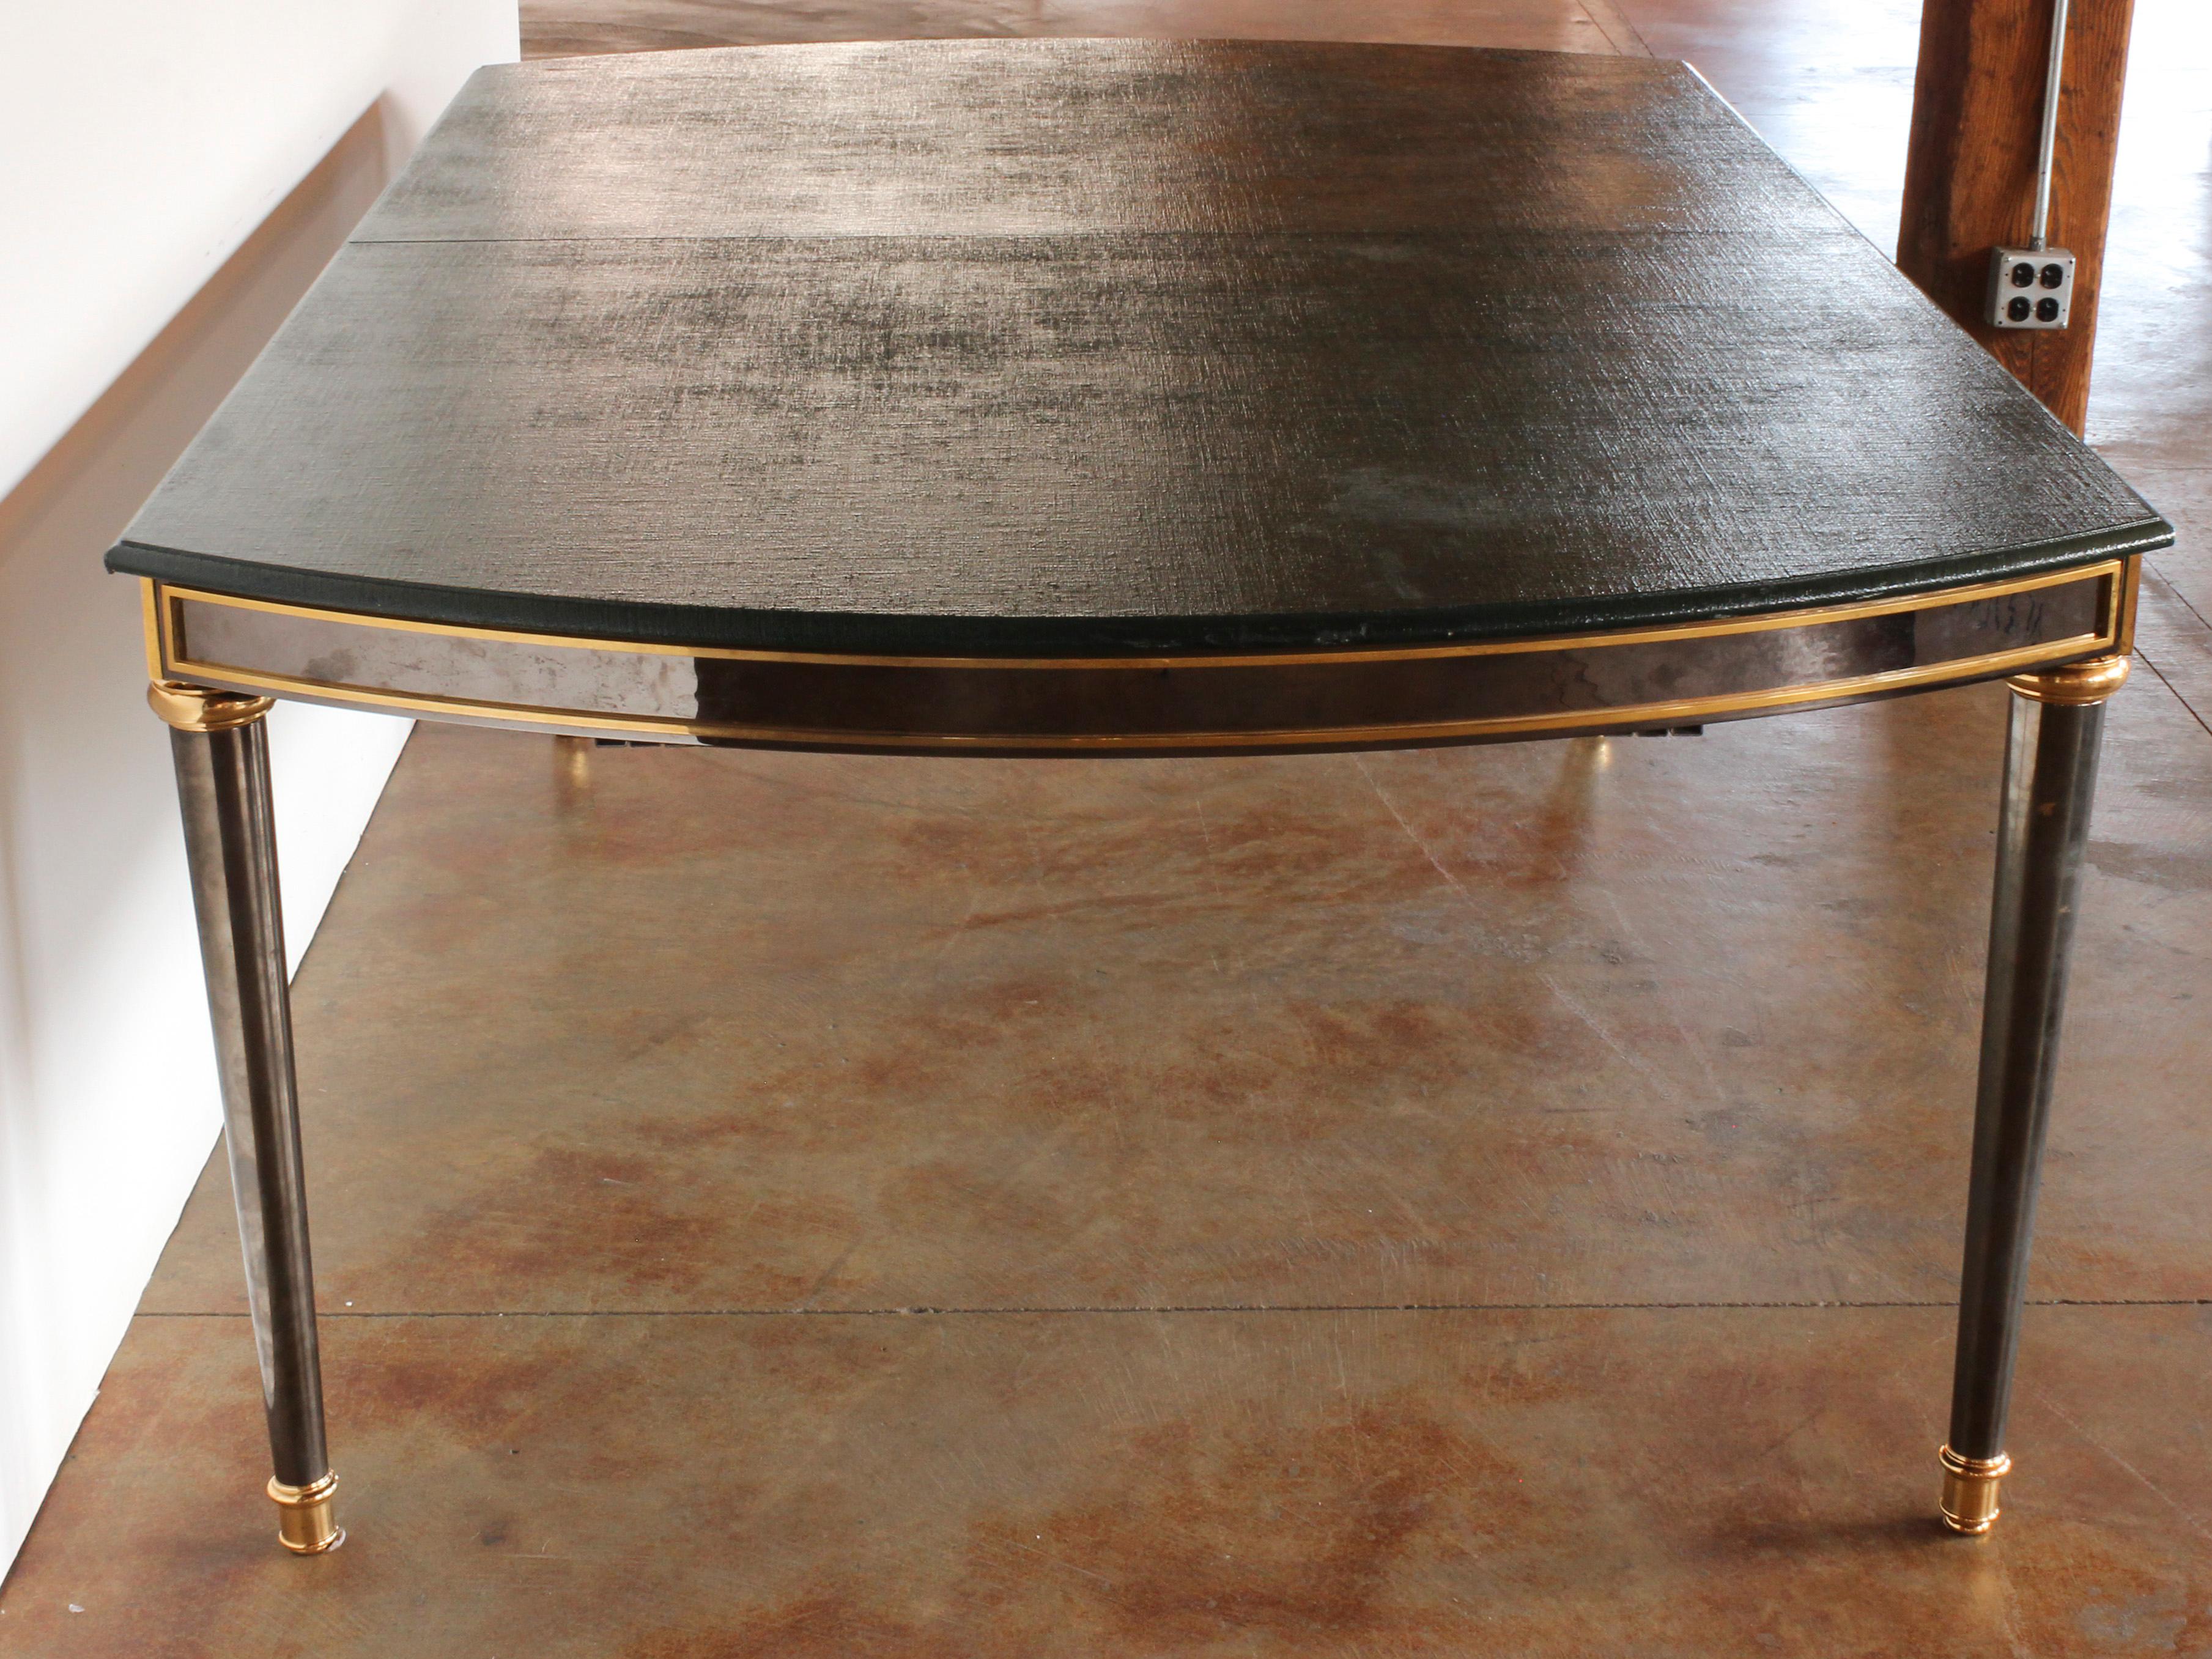 Late 19th/Early 20th Century Neoclassical Style Gilt-Bronze-Mounted Dining Table For Sale 9